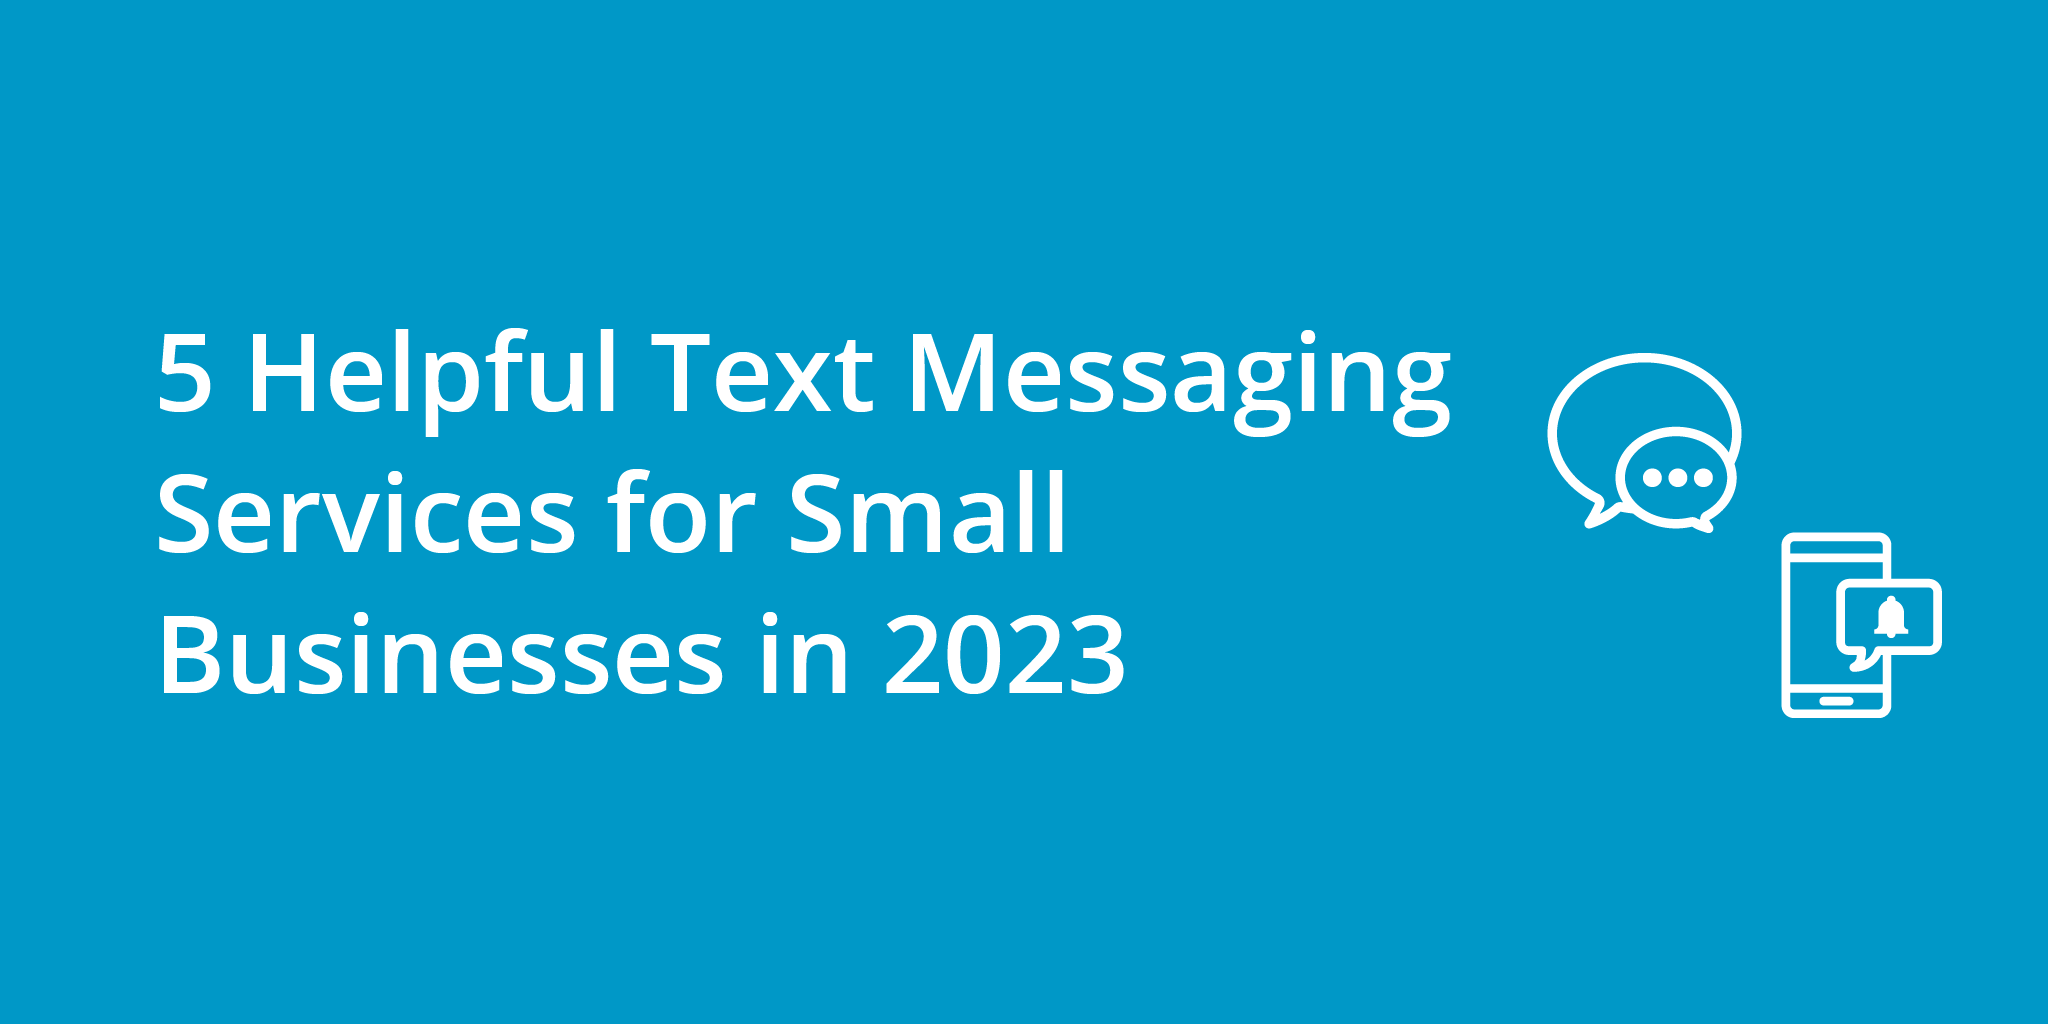 5 Helpful Text Messaging Services for Small Businesses in 2023 | Telephones for business